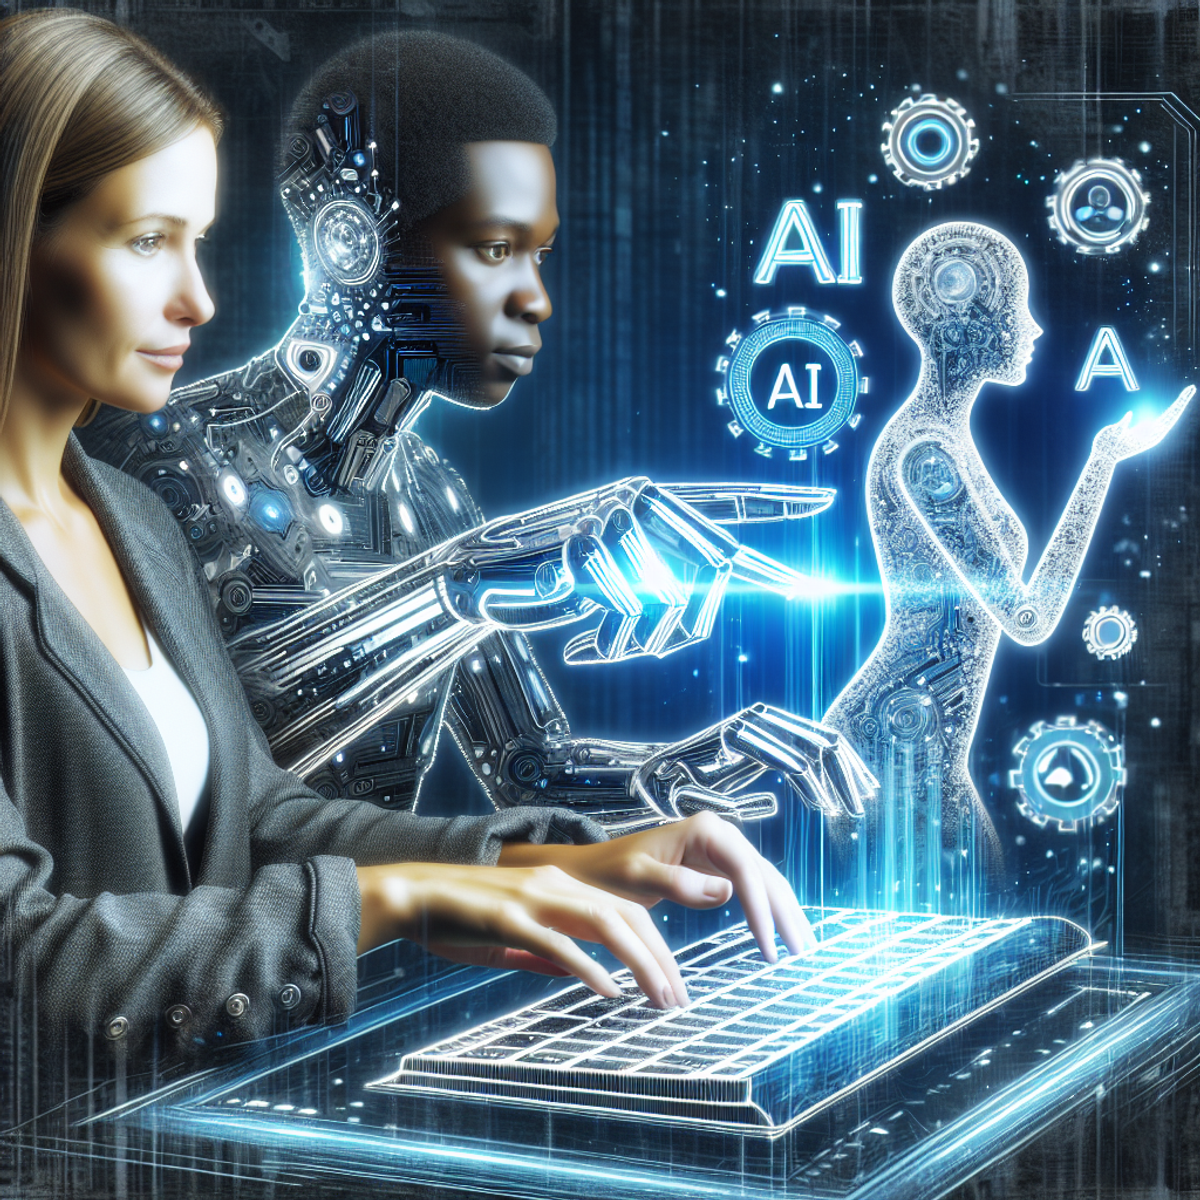 A Caucasian woman and a Black man collaborate with futuristic technology, using a keyboard adorned with AI symbols. Data flows from the keyboard, symbolizing the writing process accelerated by AI.